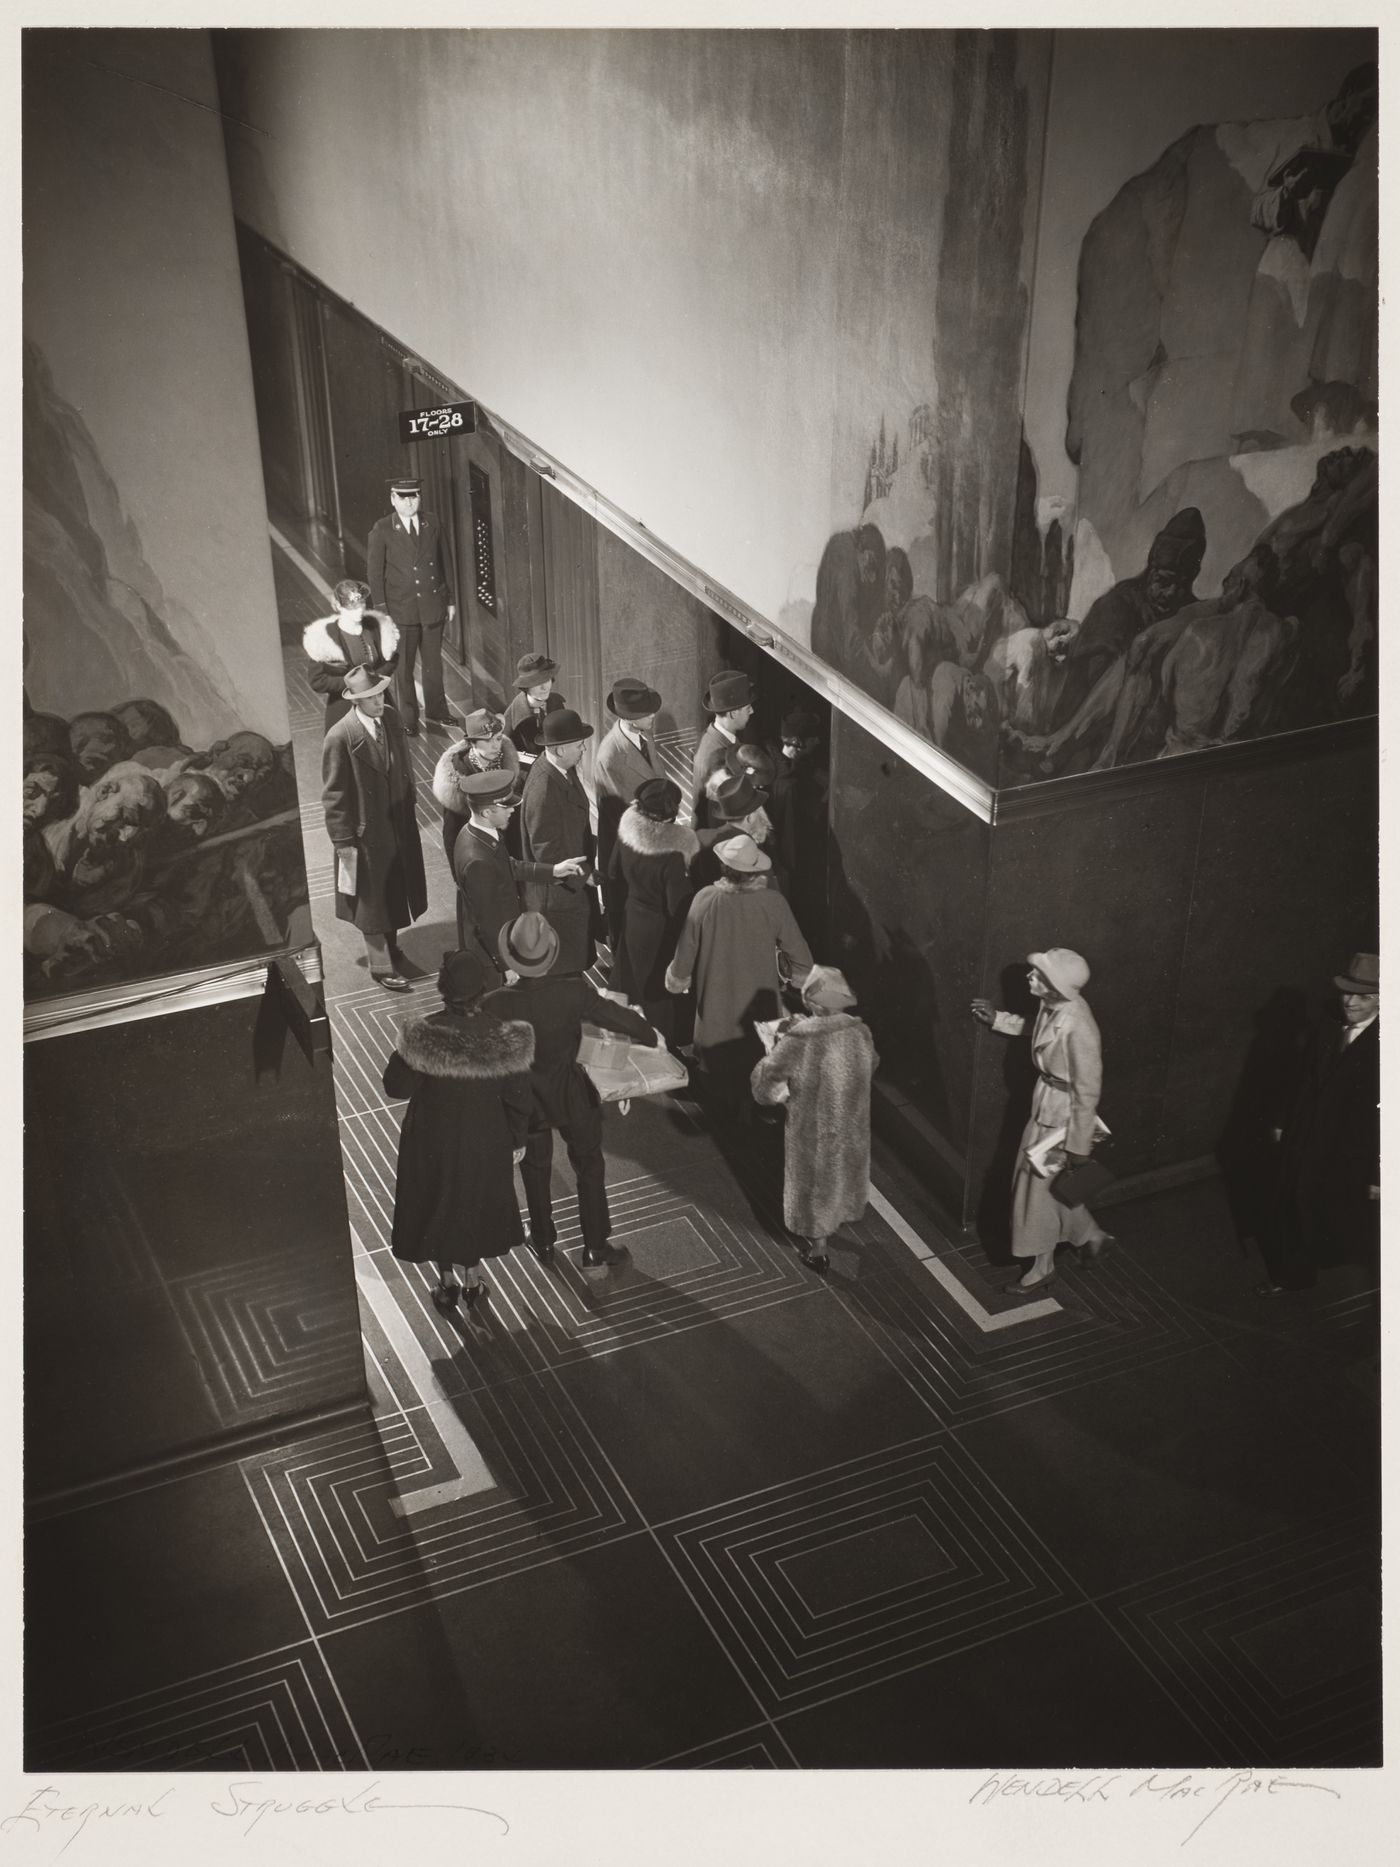 RCA Building, view of lobby with wall murals, people entering elevator, New York City, New York